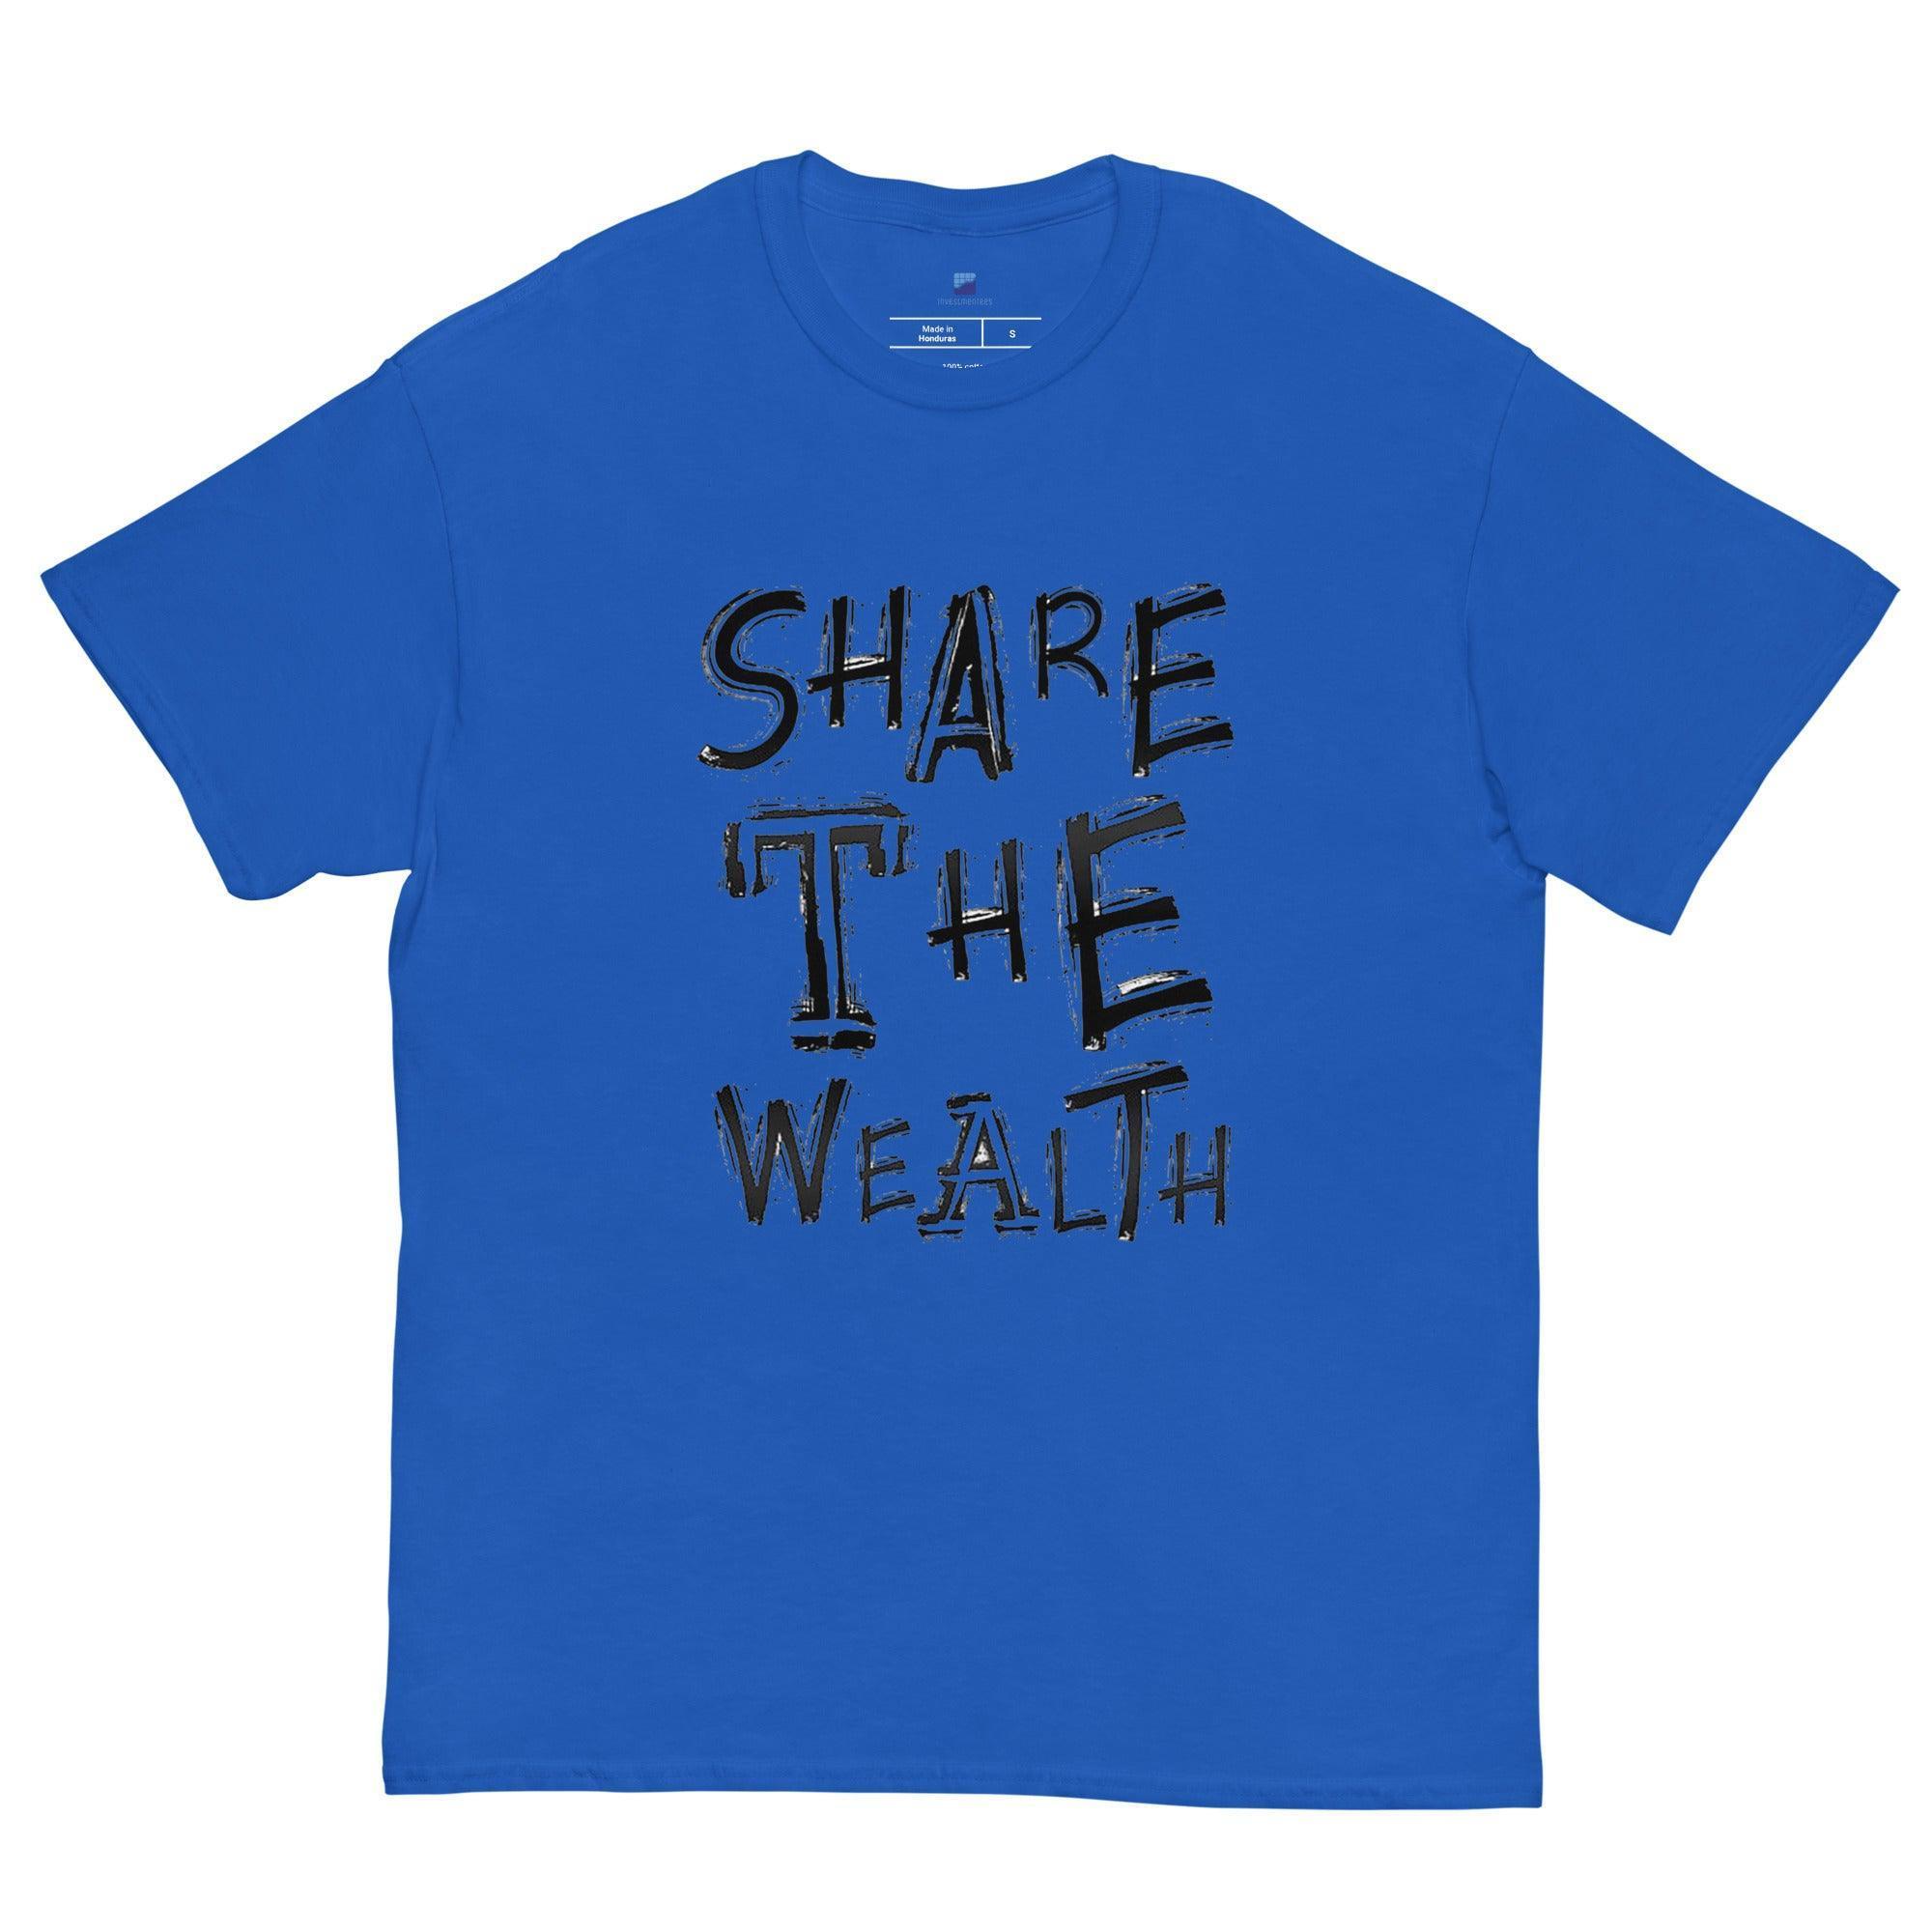 Share The Wealth T-Shirt - InvestmenTees